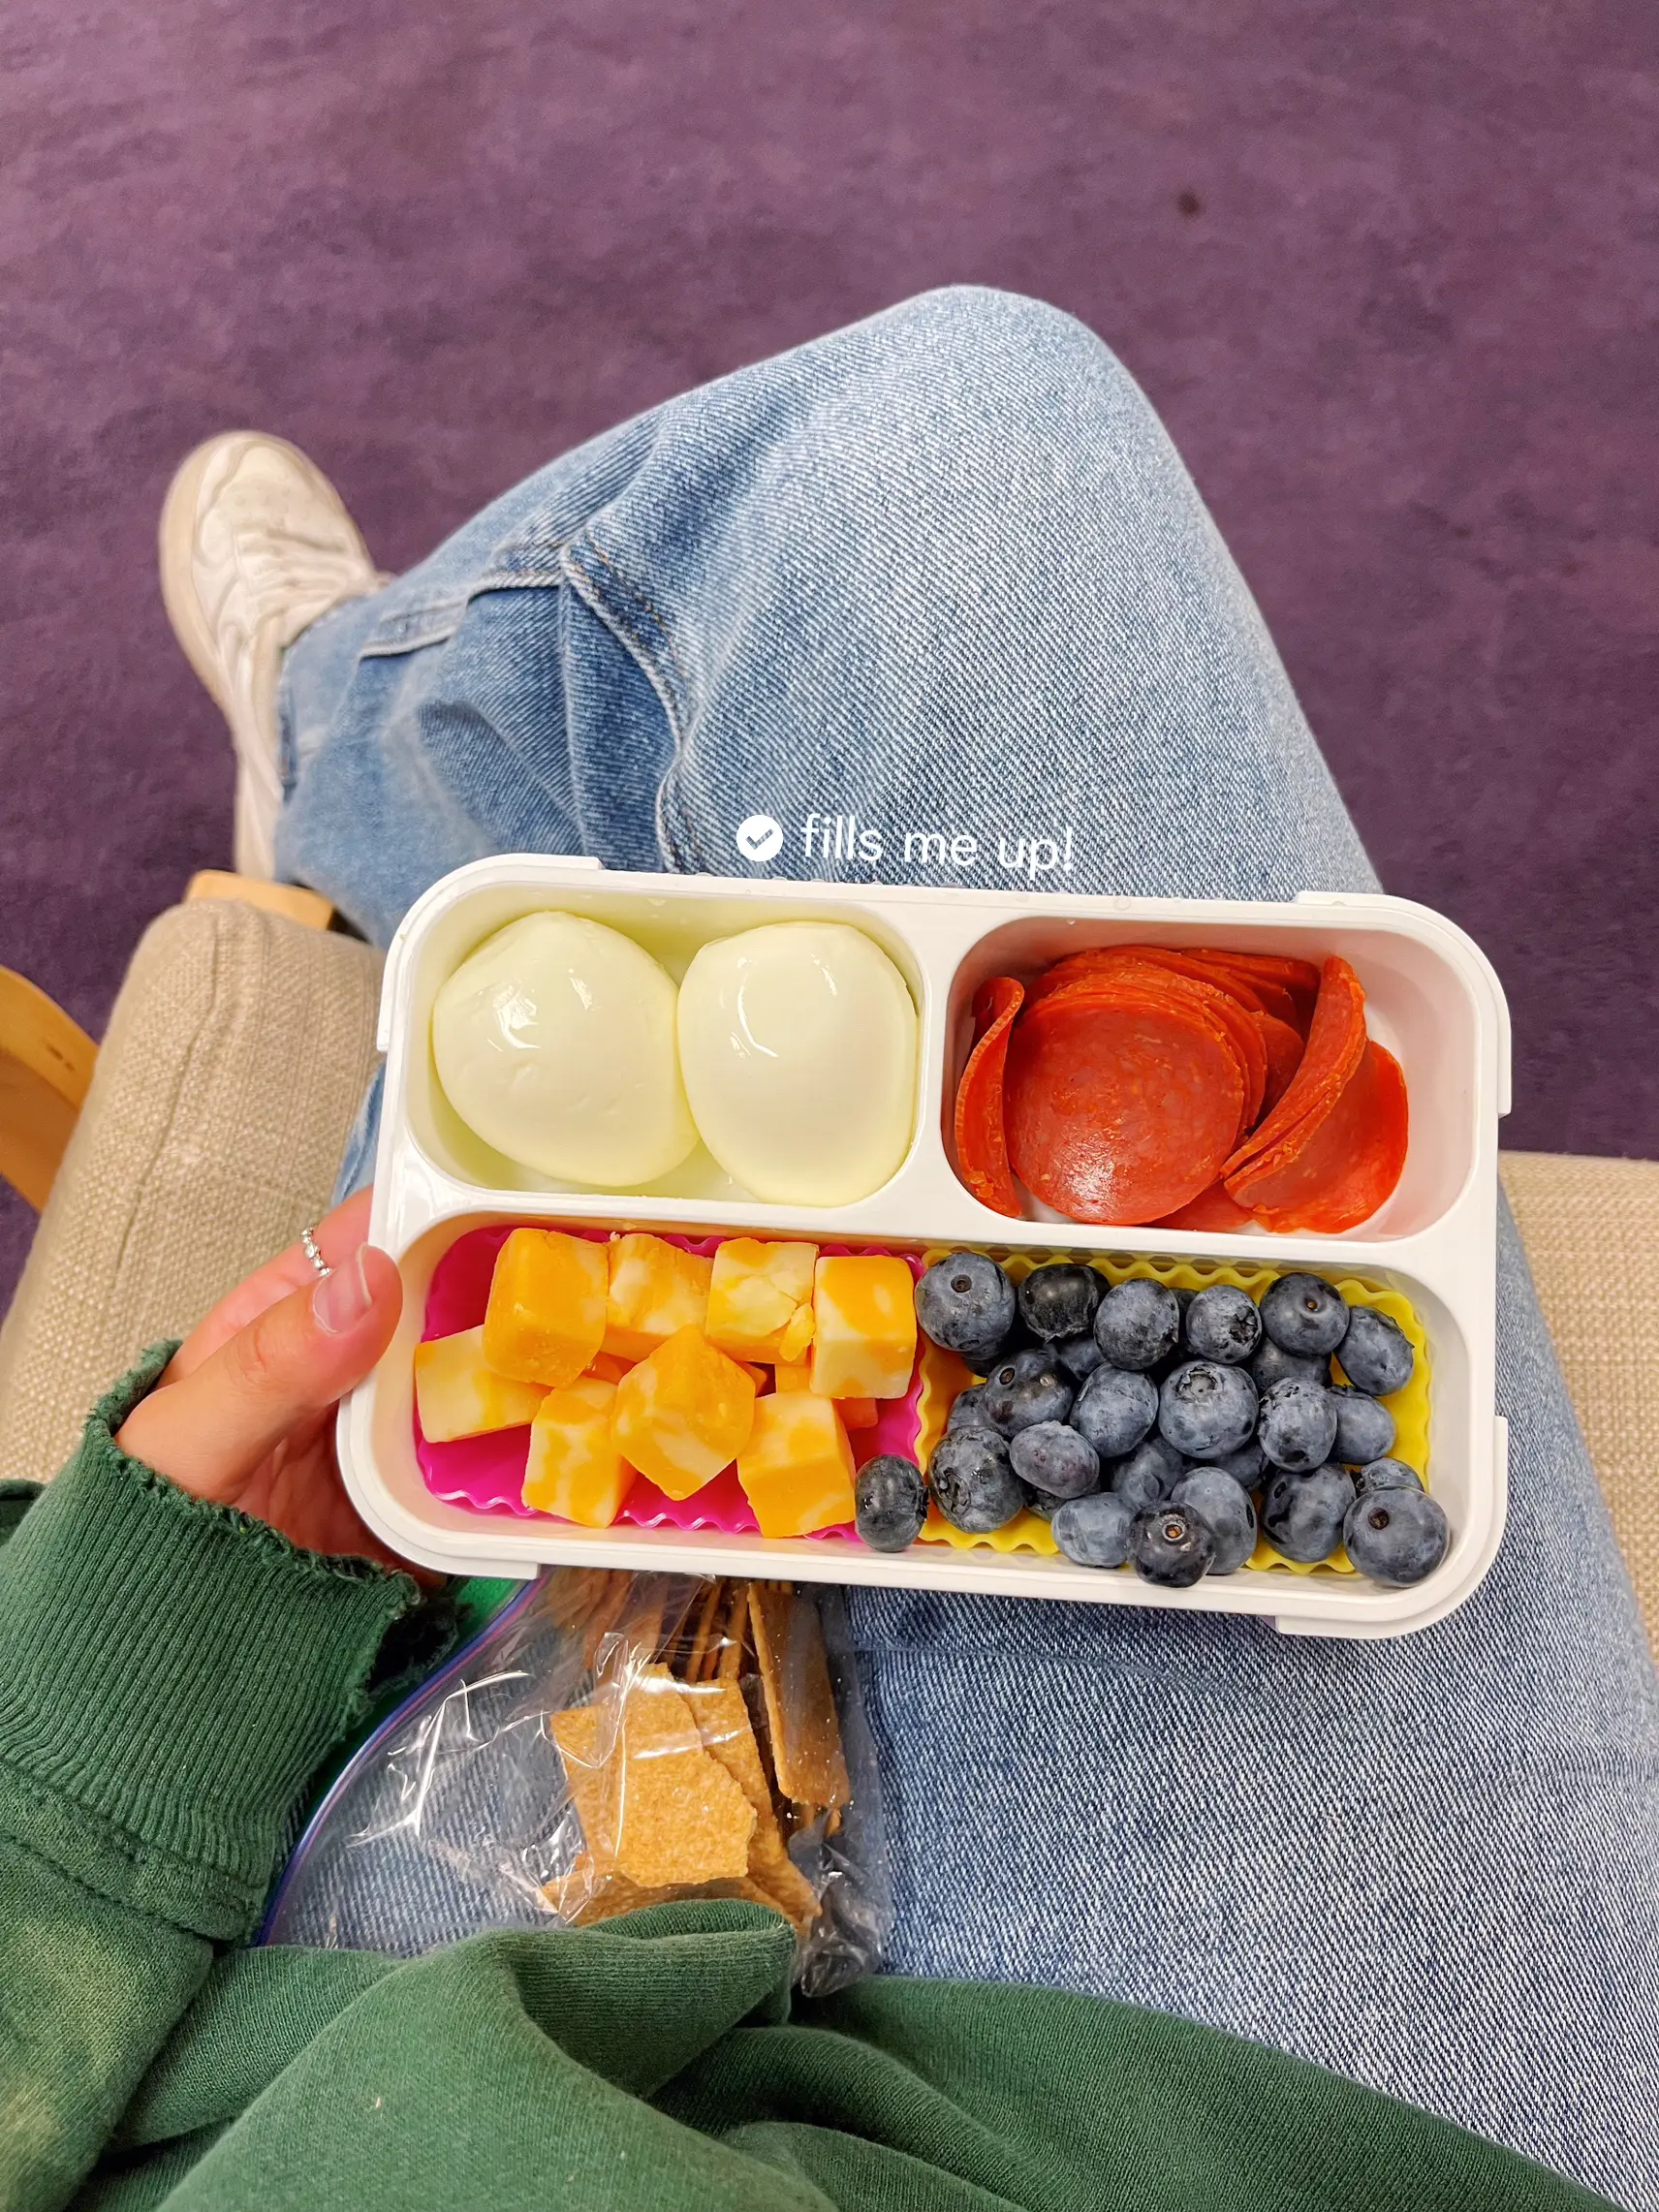 The Lunch Box Rumors Are True ⋆ 100 Days of Real Food